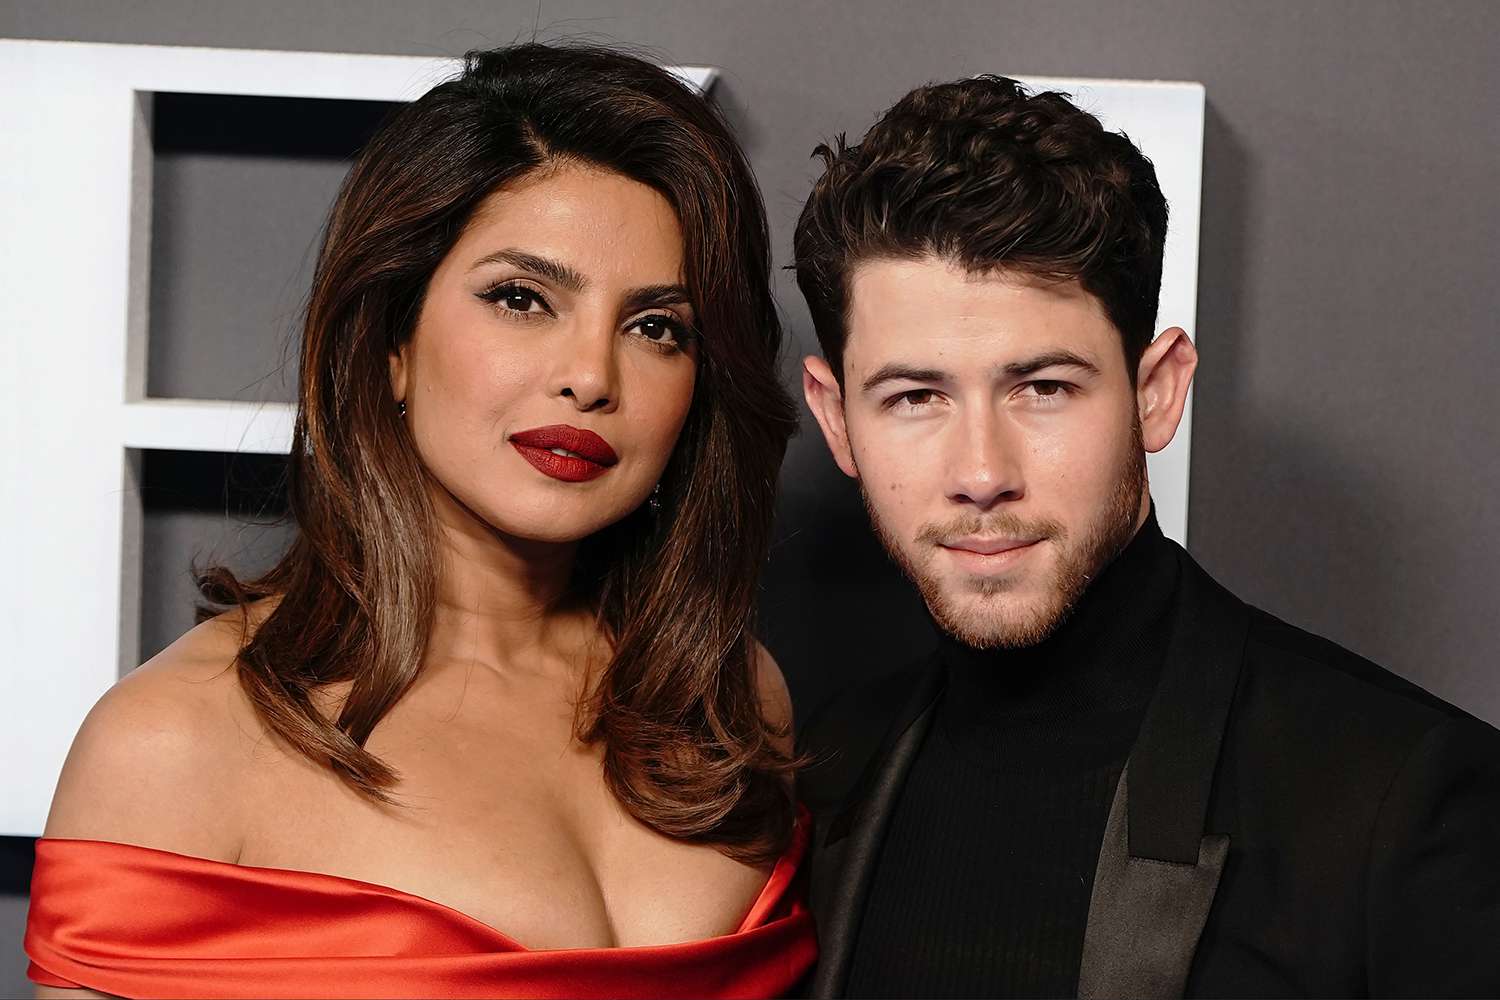 Nick Jonas Celebrates 6-Year Anniversary of Day He Asked Priyanka Chopra to Marry Him: 'Thank You for Saying Yes'